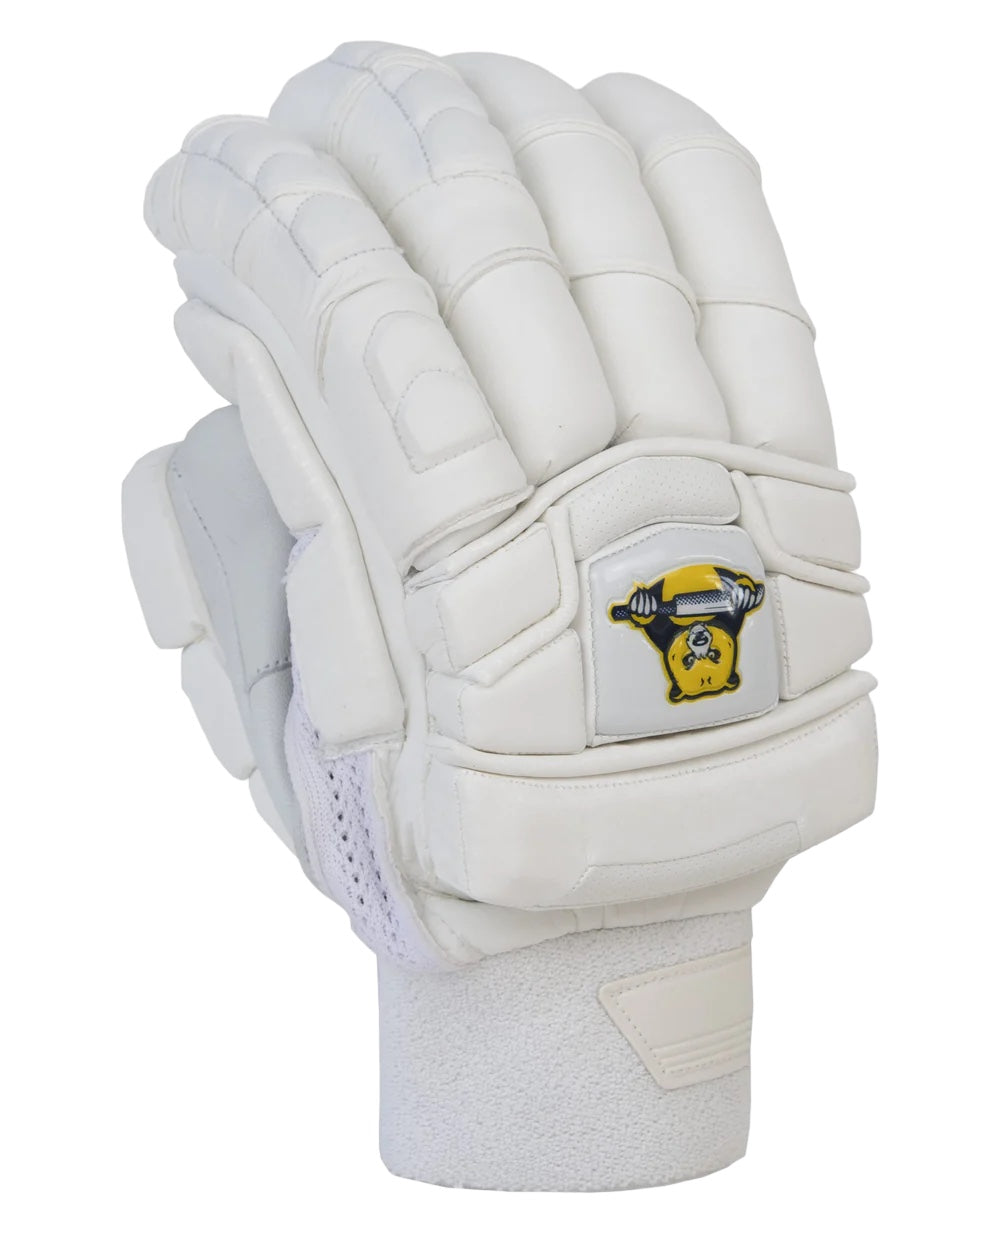 Bear Cricket Limited Edition Bear Claw Junior Batting Gloves - The Cricket Store